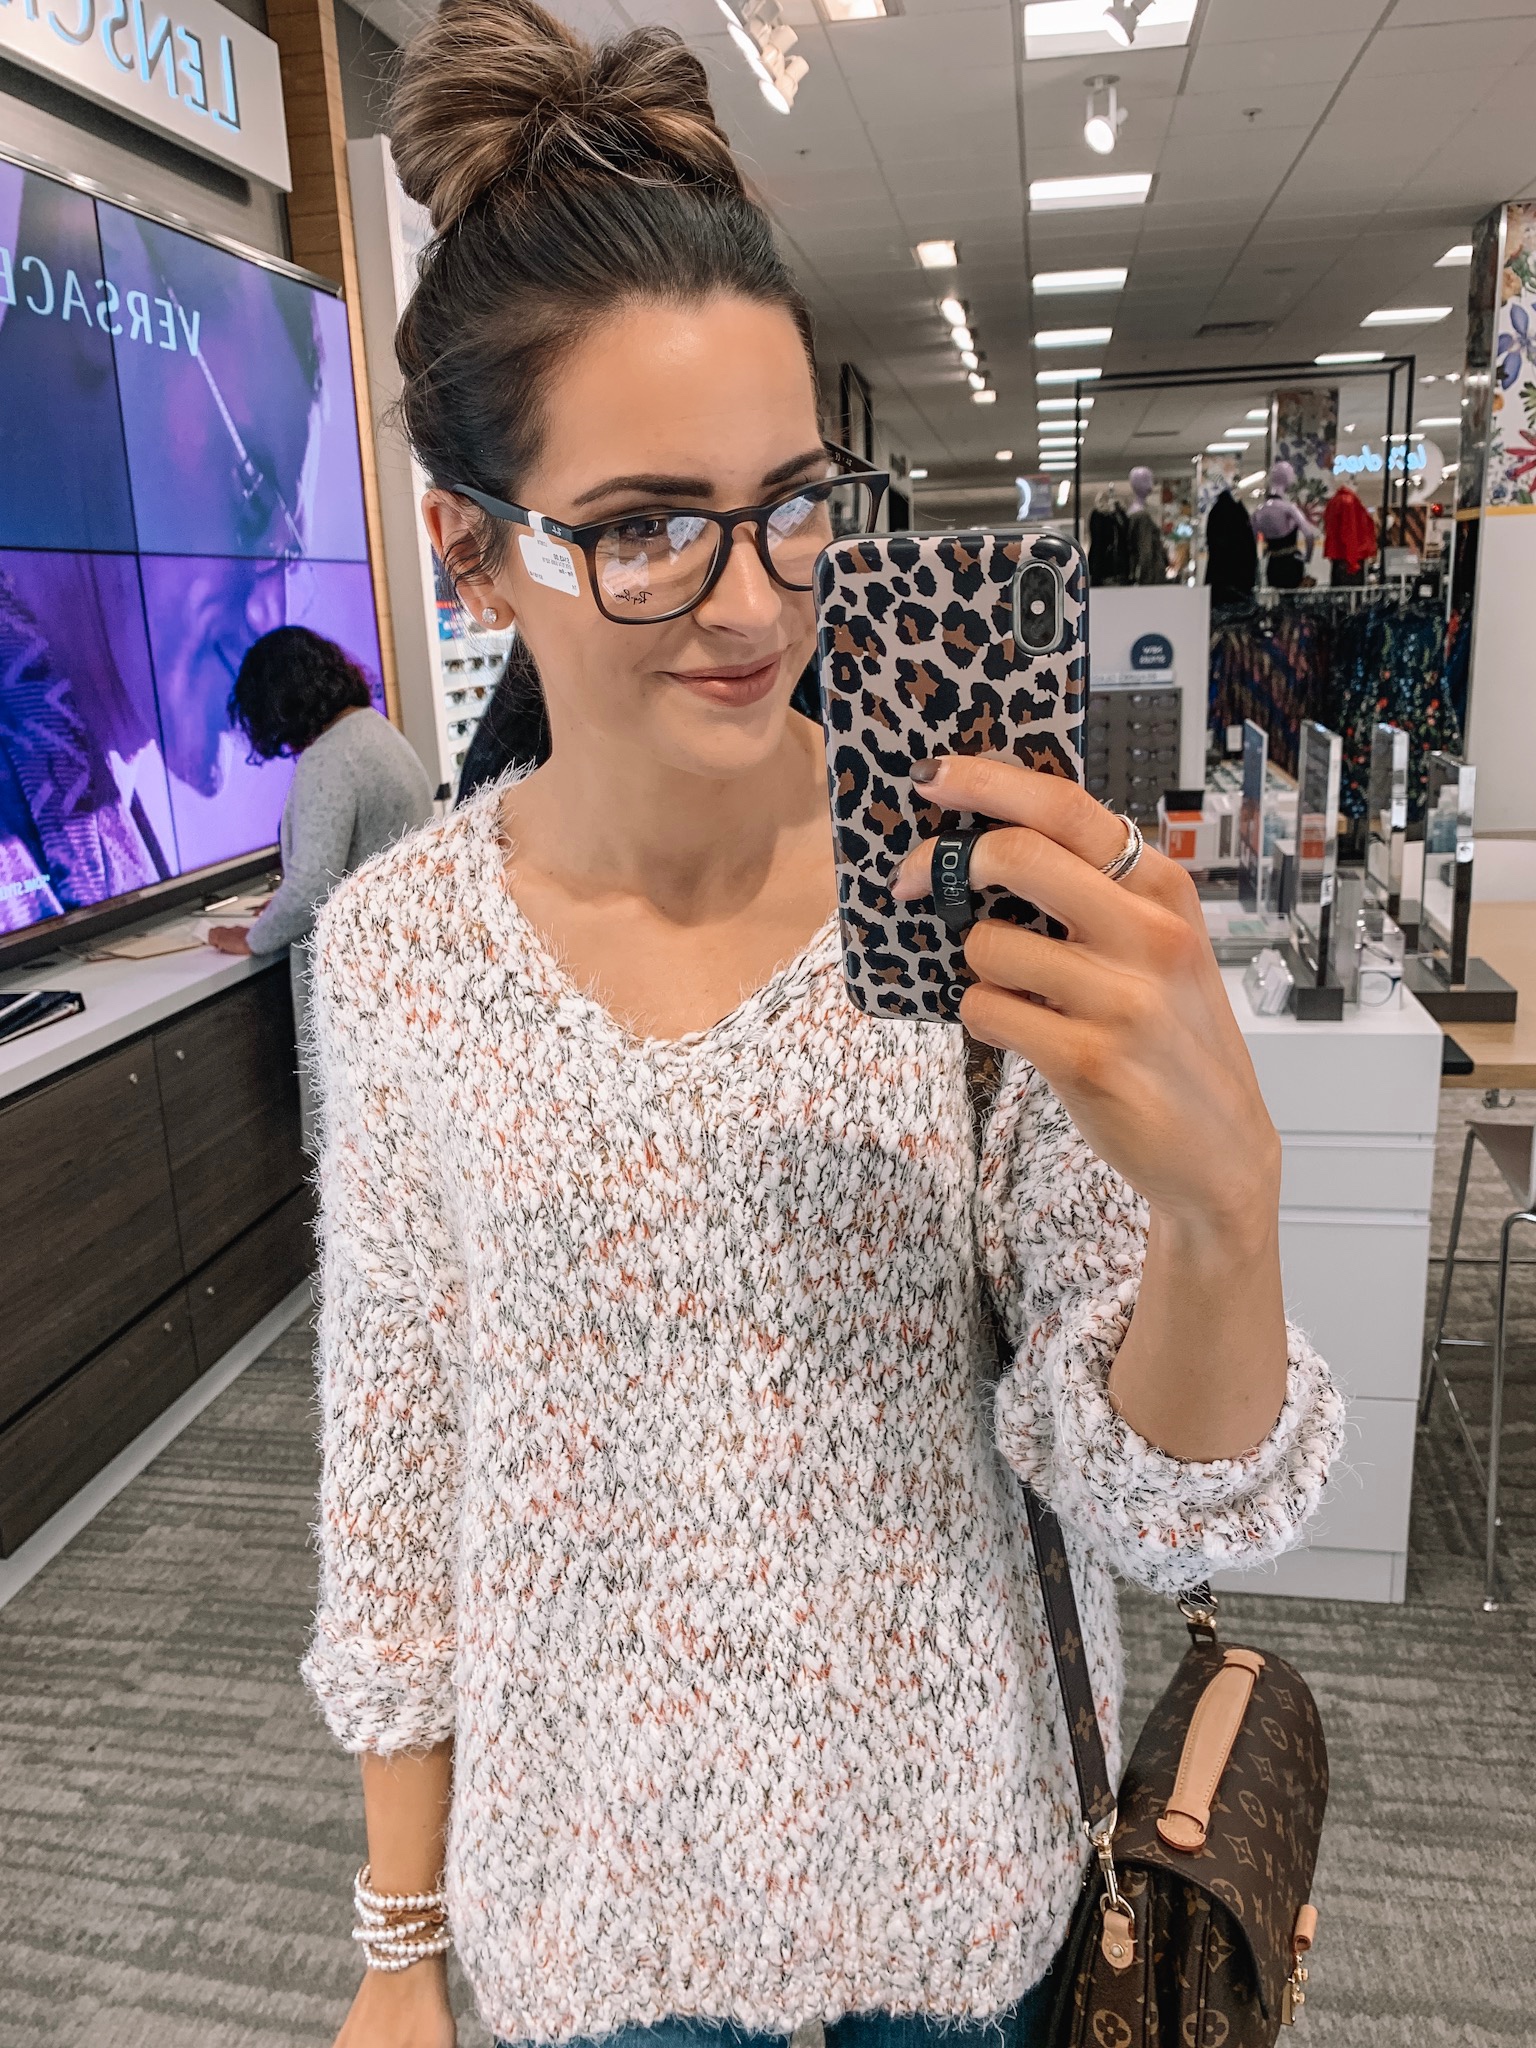 My New Glasses and LensCrafters at Macy's Experience - The Styled Press